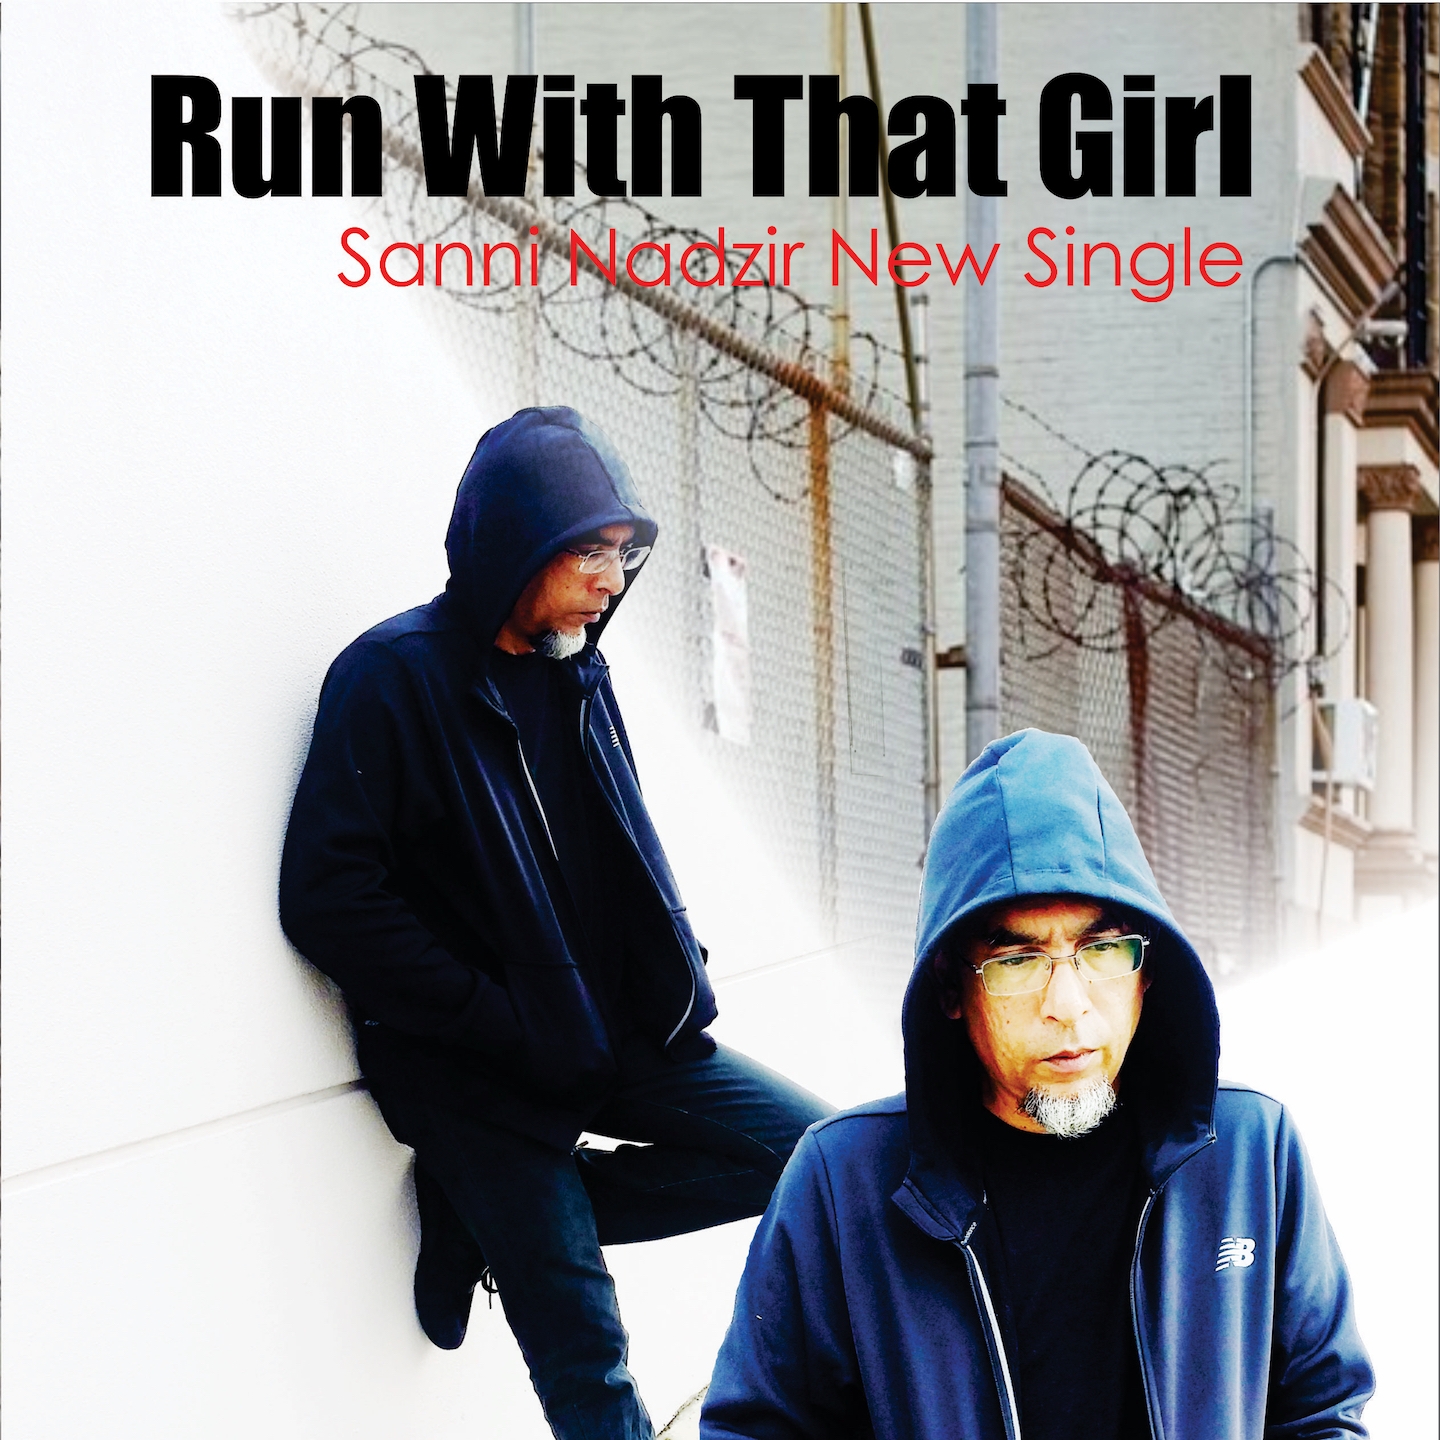 Run with That Girl